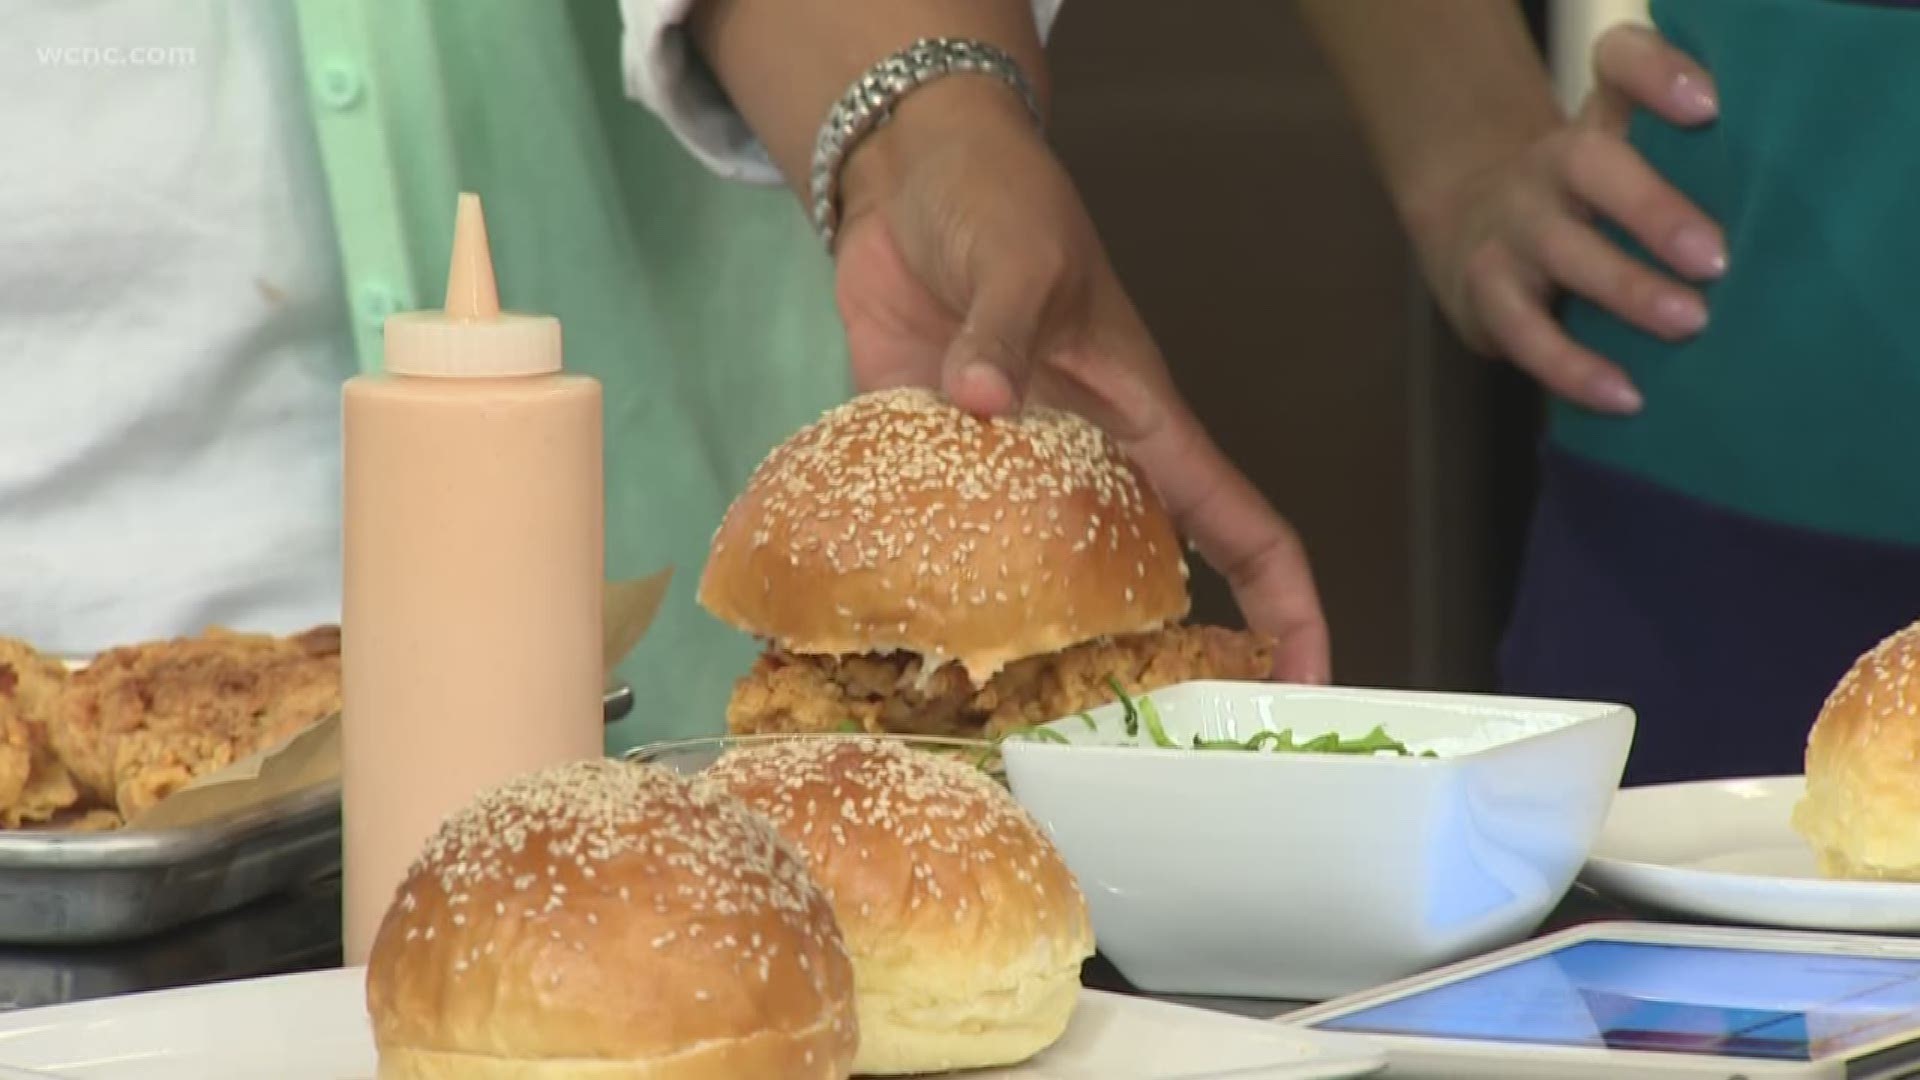 Andria Gaskins shows you how to make a drive through favorite in your own kitchen